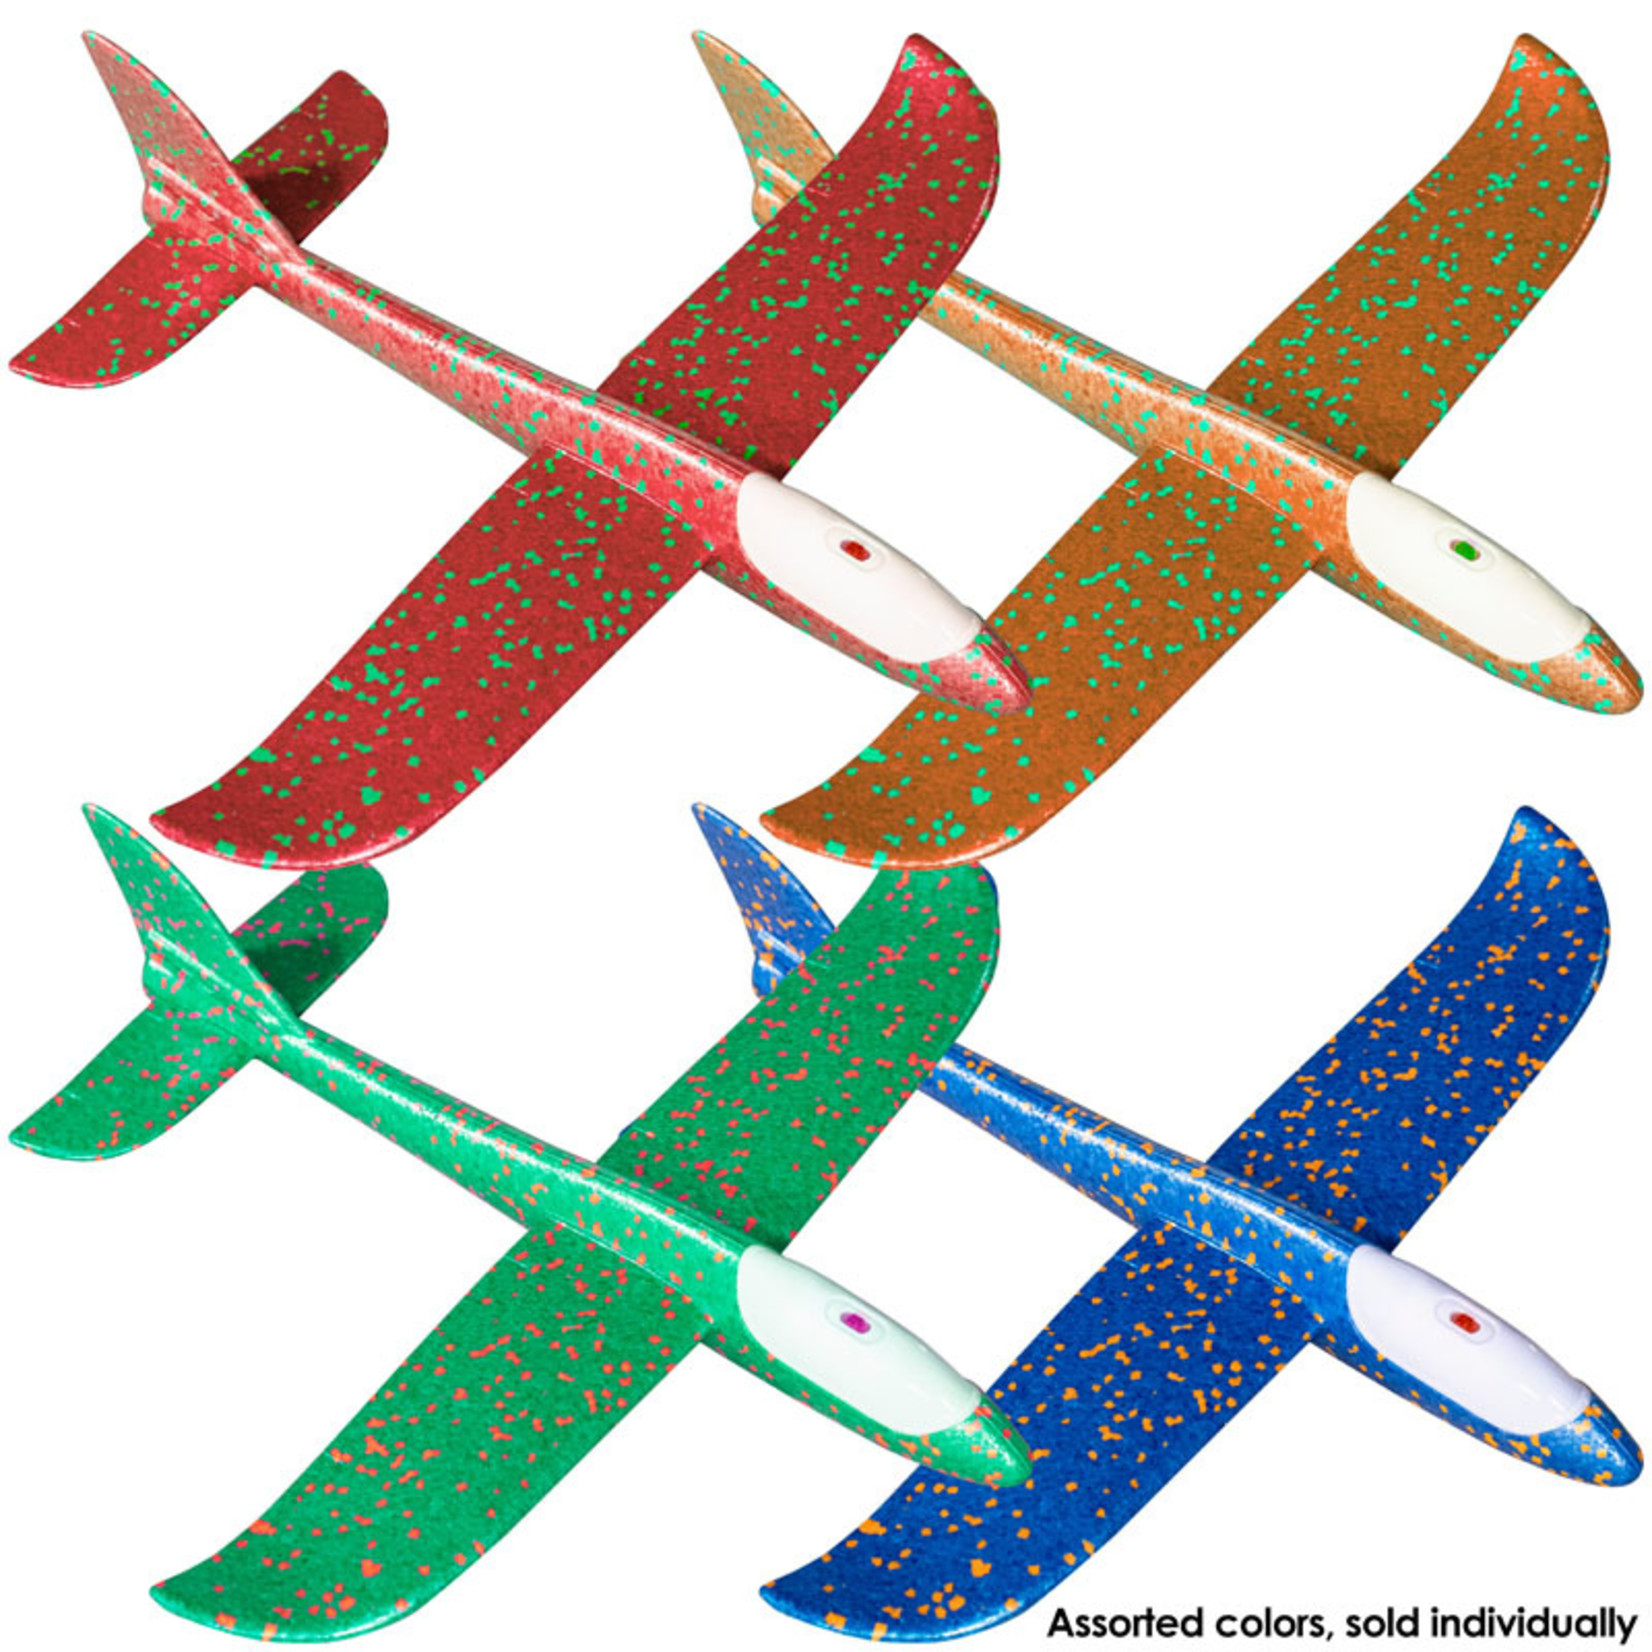 Fire Fox Trixter LED Glider Plane (Assorted Colors)